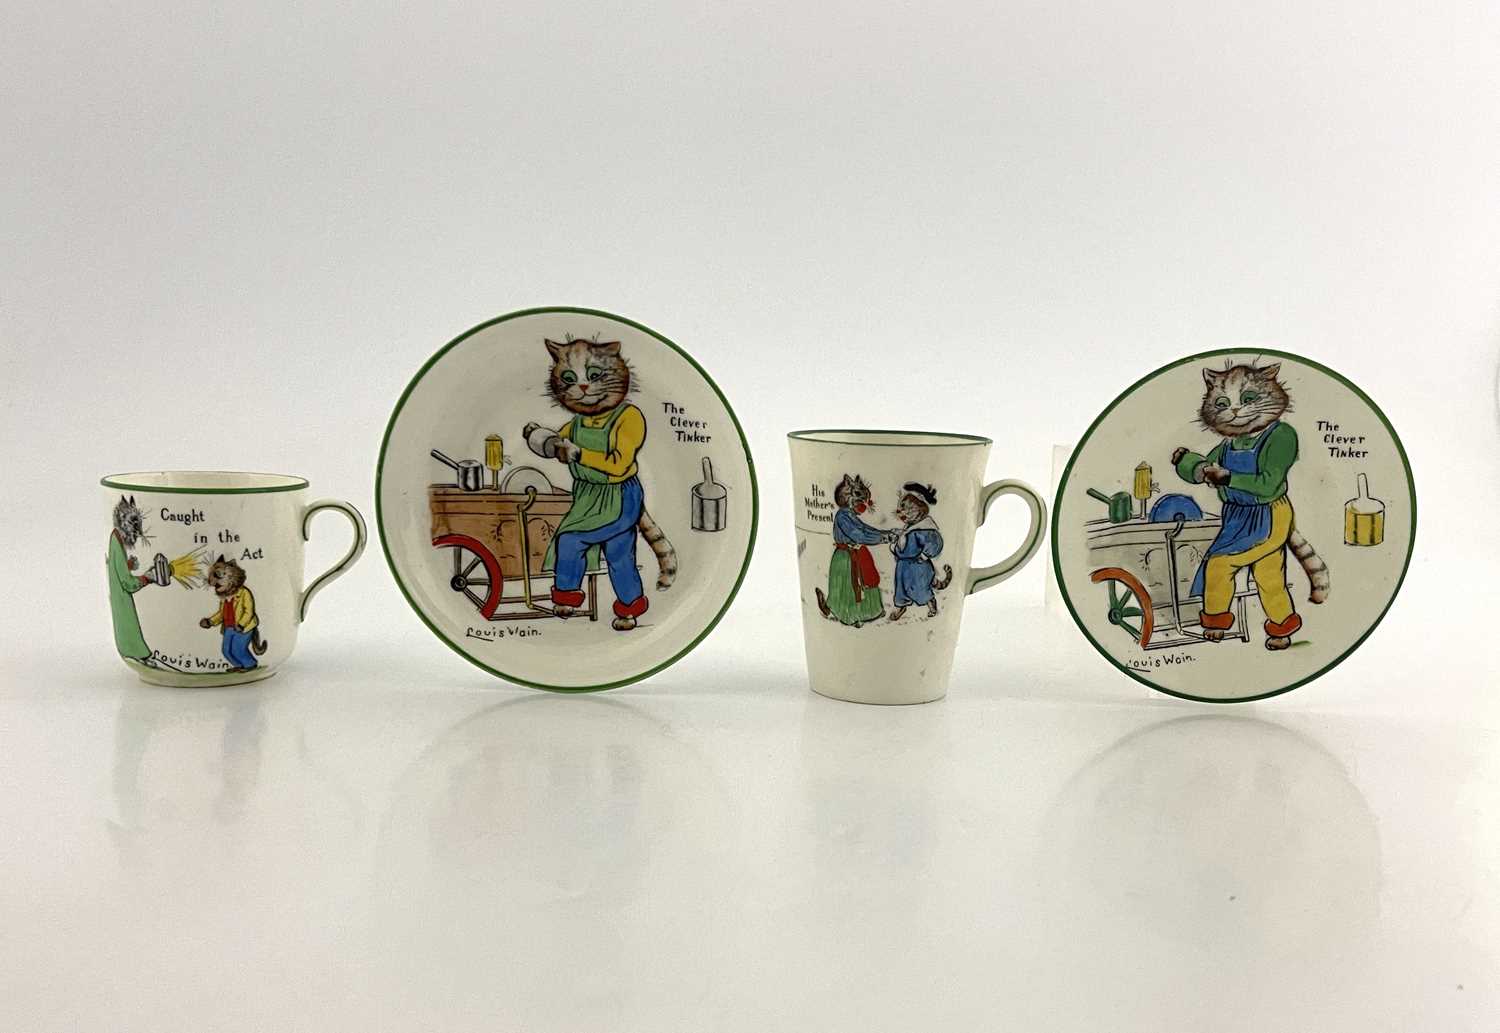 Louis Wain for Paragon China, a cup 'Caught in the Act', a saucer 'The Clever Tinker', a side